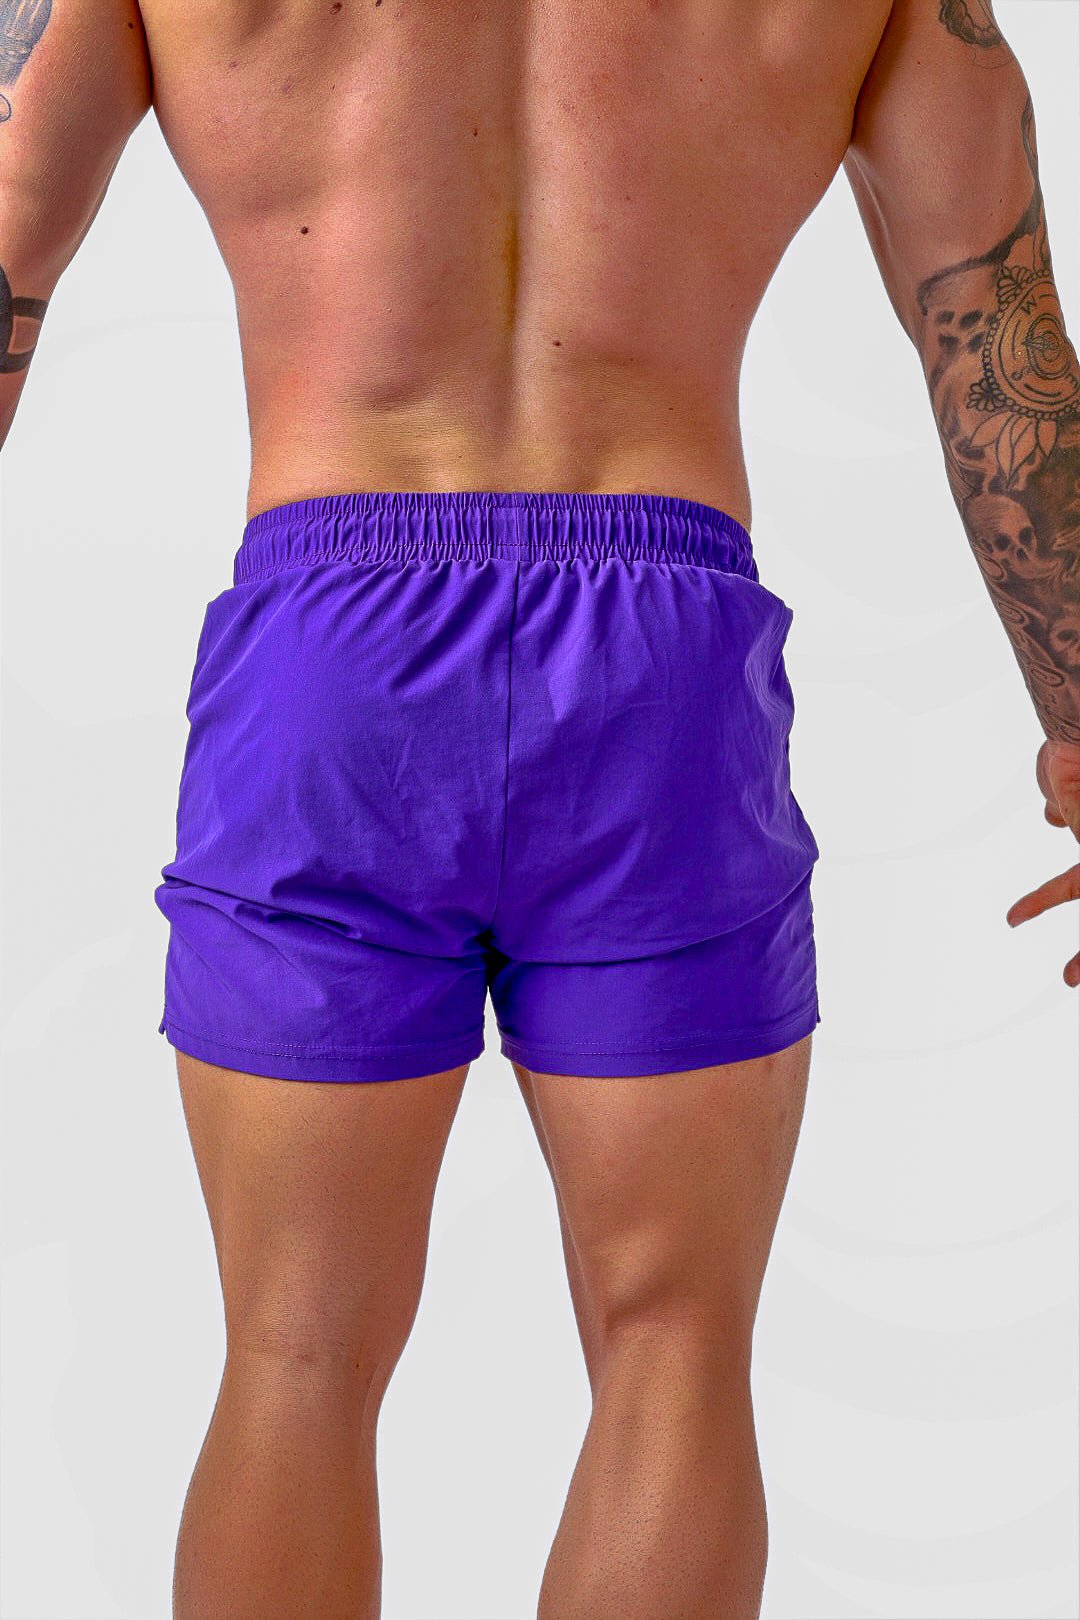 Roo Shorts - Purple - GYMROOS